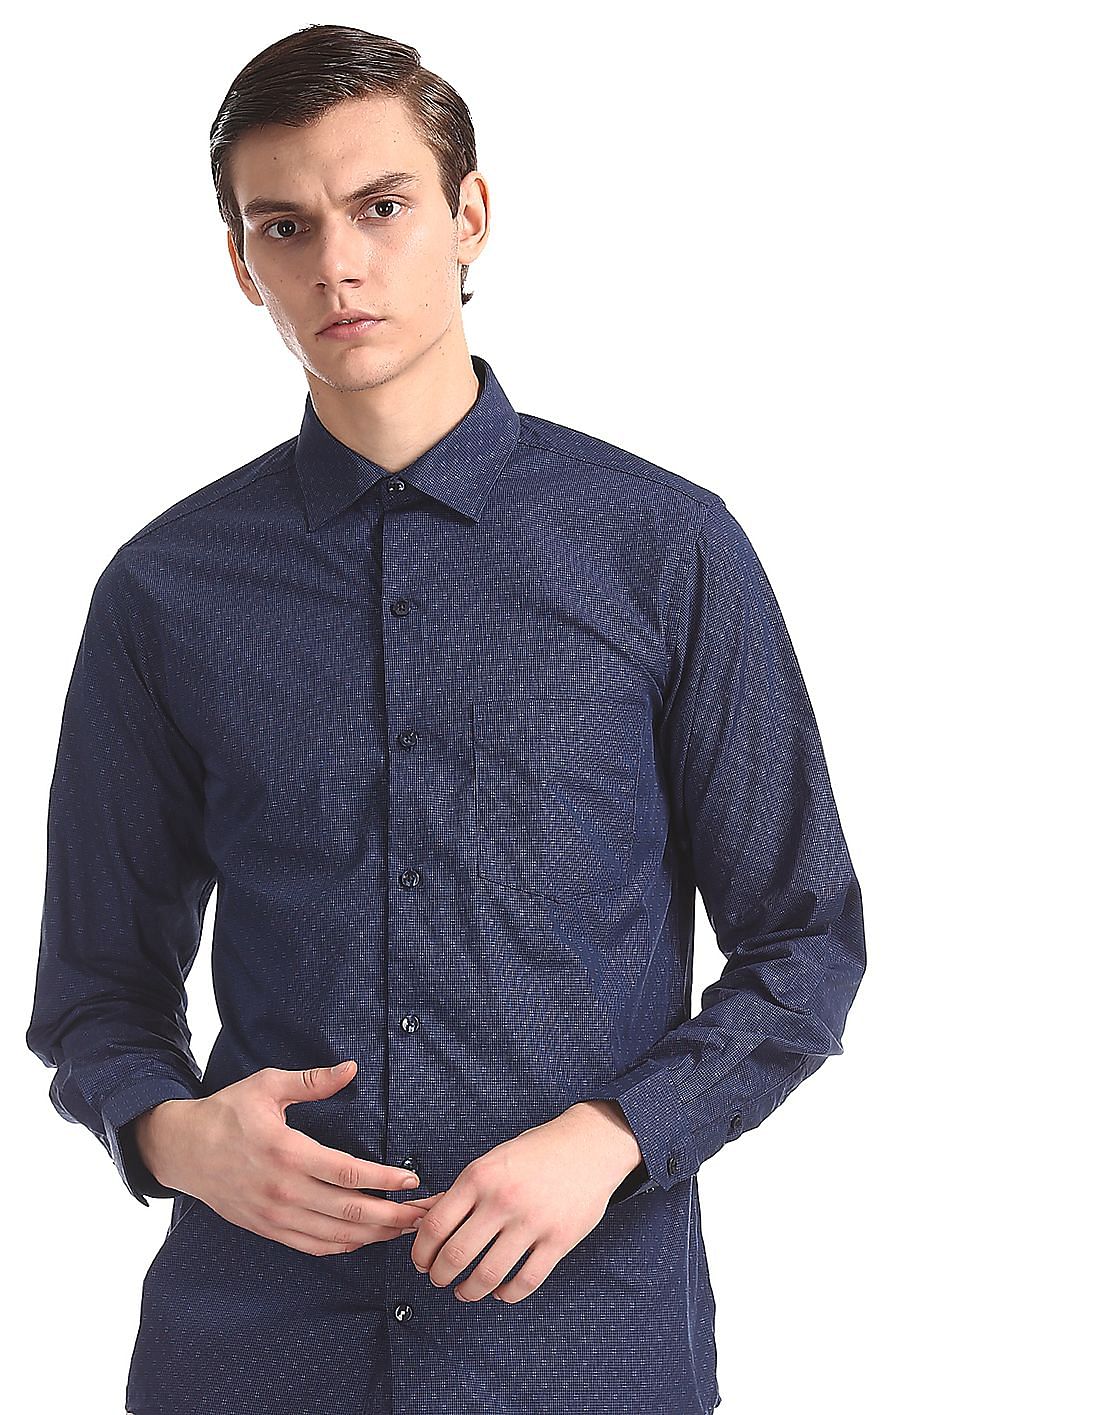 Buy Excalibur Blue French Placket Patterned Check Shirt - NNNOW.com